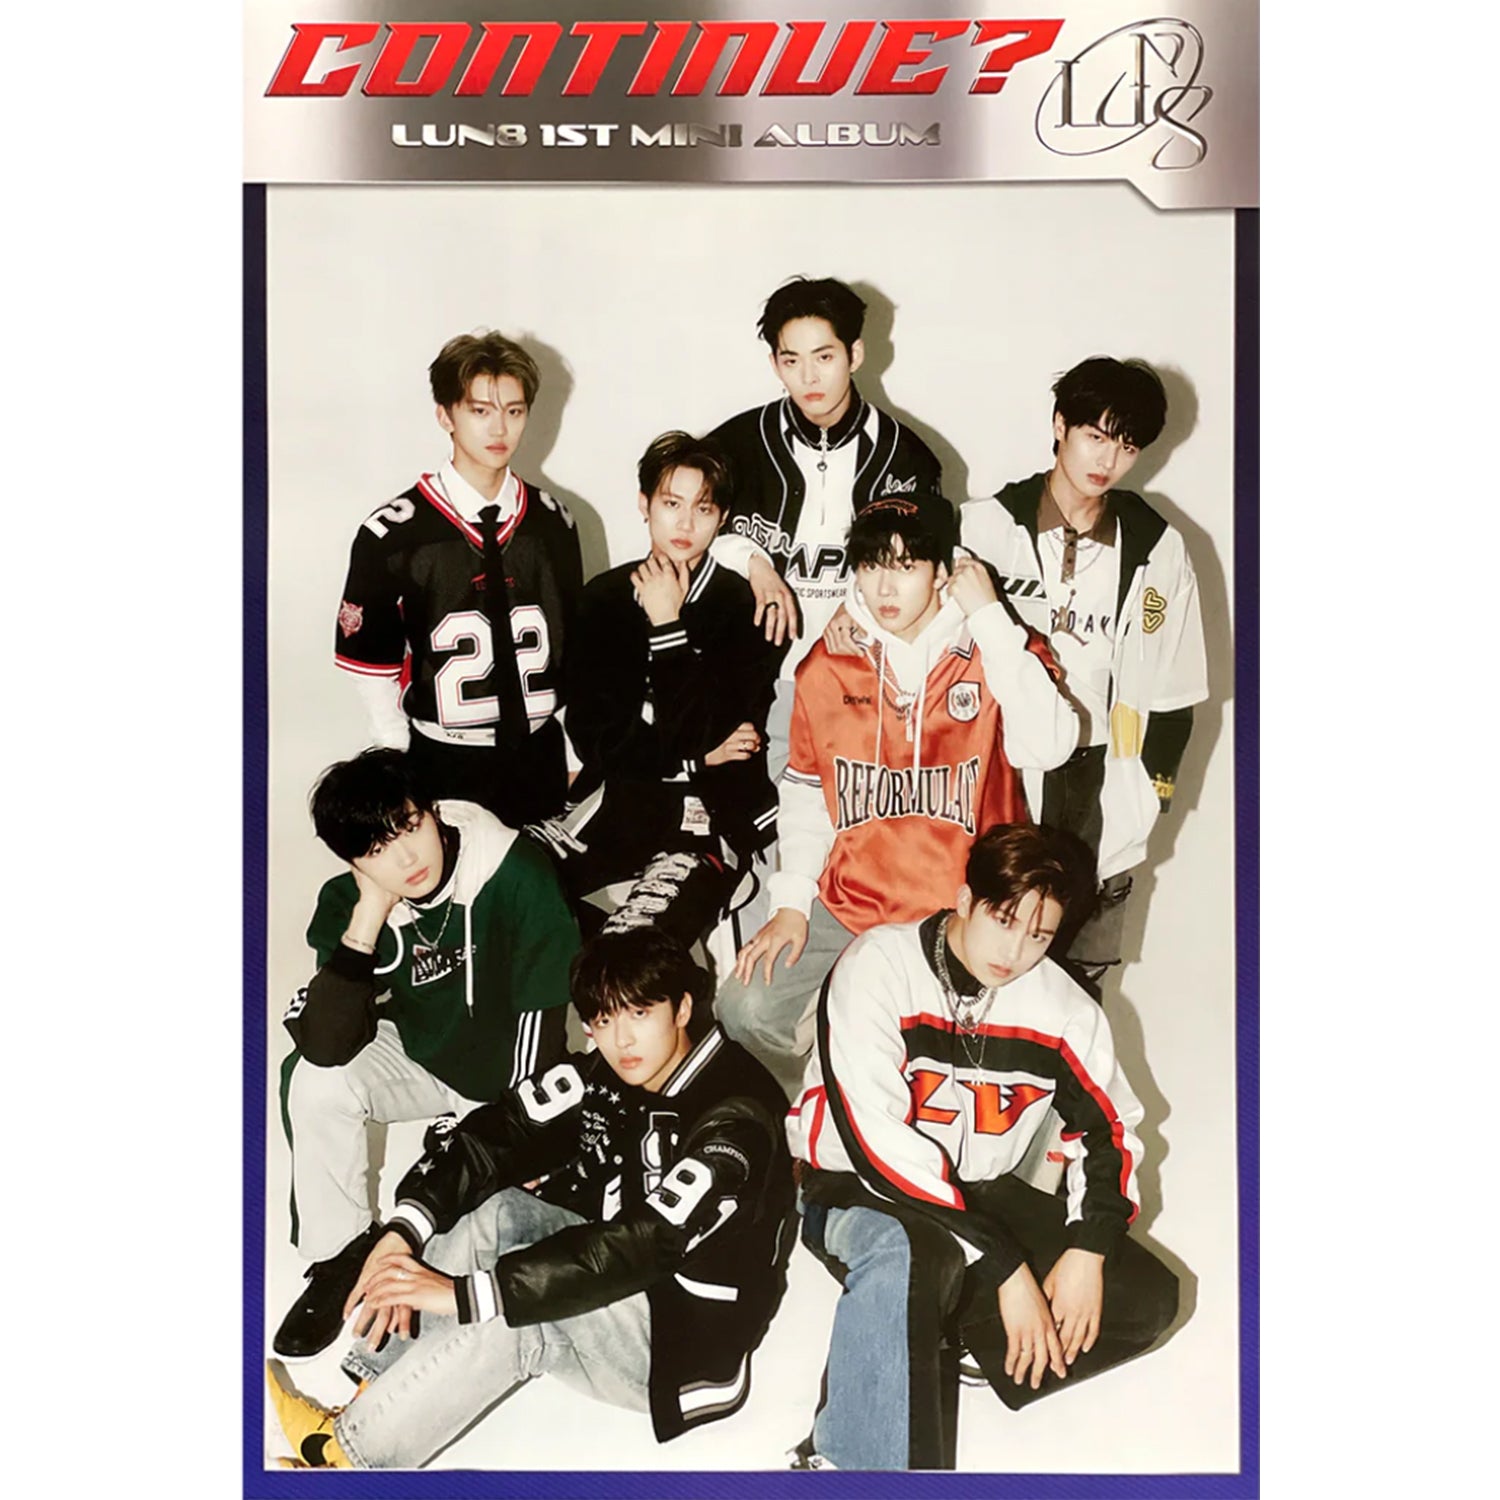 LUN8 1ST MINI ALBUM 'CONTINUE?' POSTER ONLY A VERSION COVER